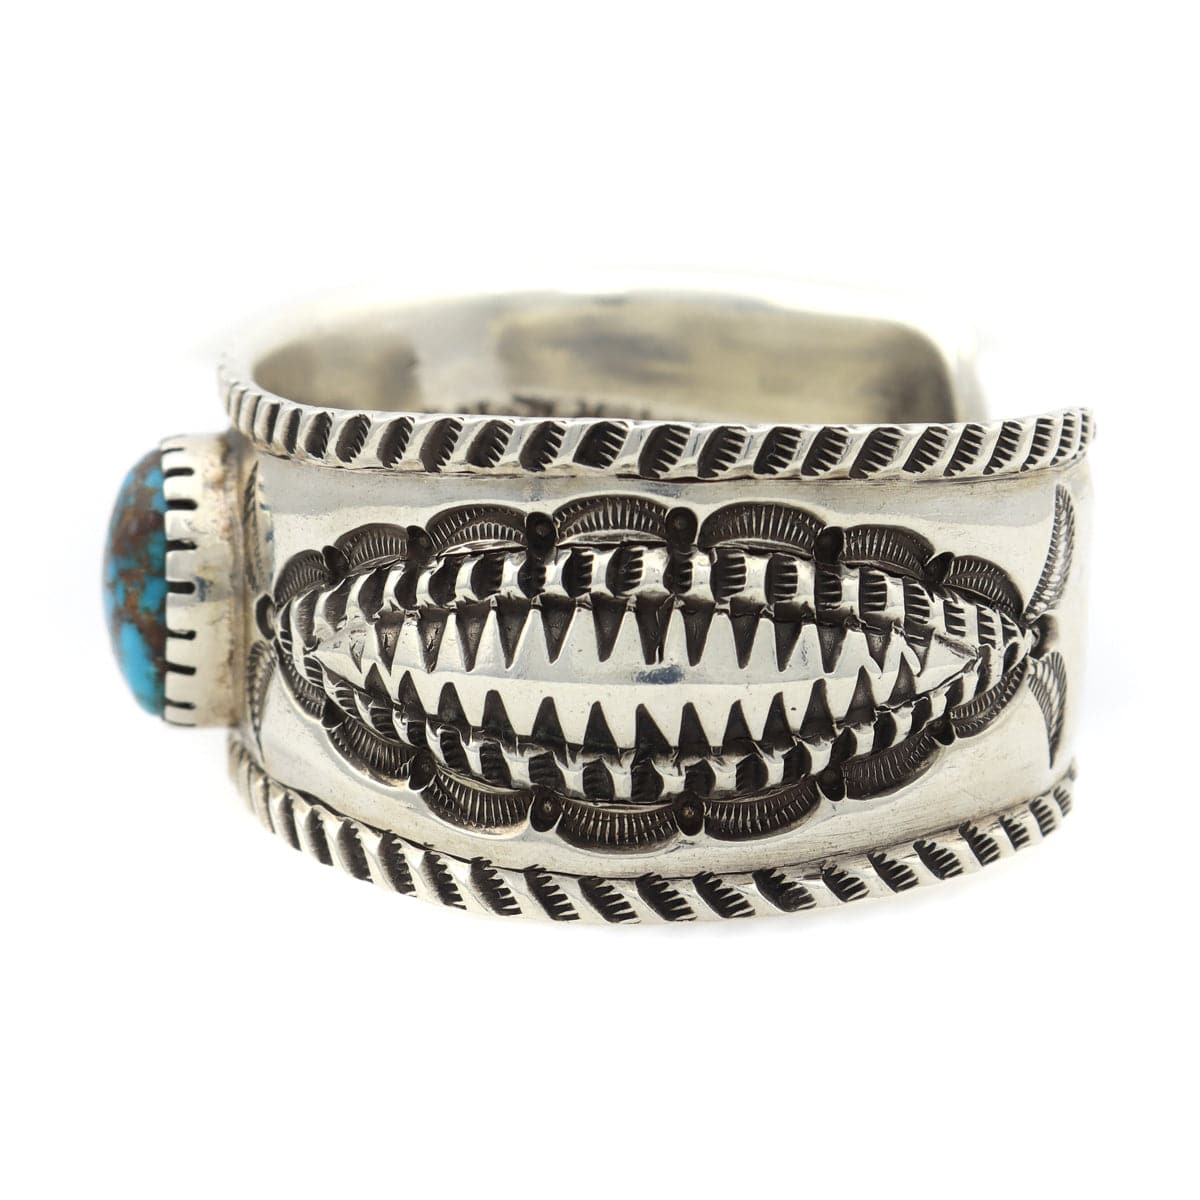 Ernie Lister - Navajo Bisbee Turquoise and Silver Bracelet with Stamped Design c. 2015-2017, size 7 (J13014) 1
